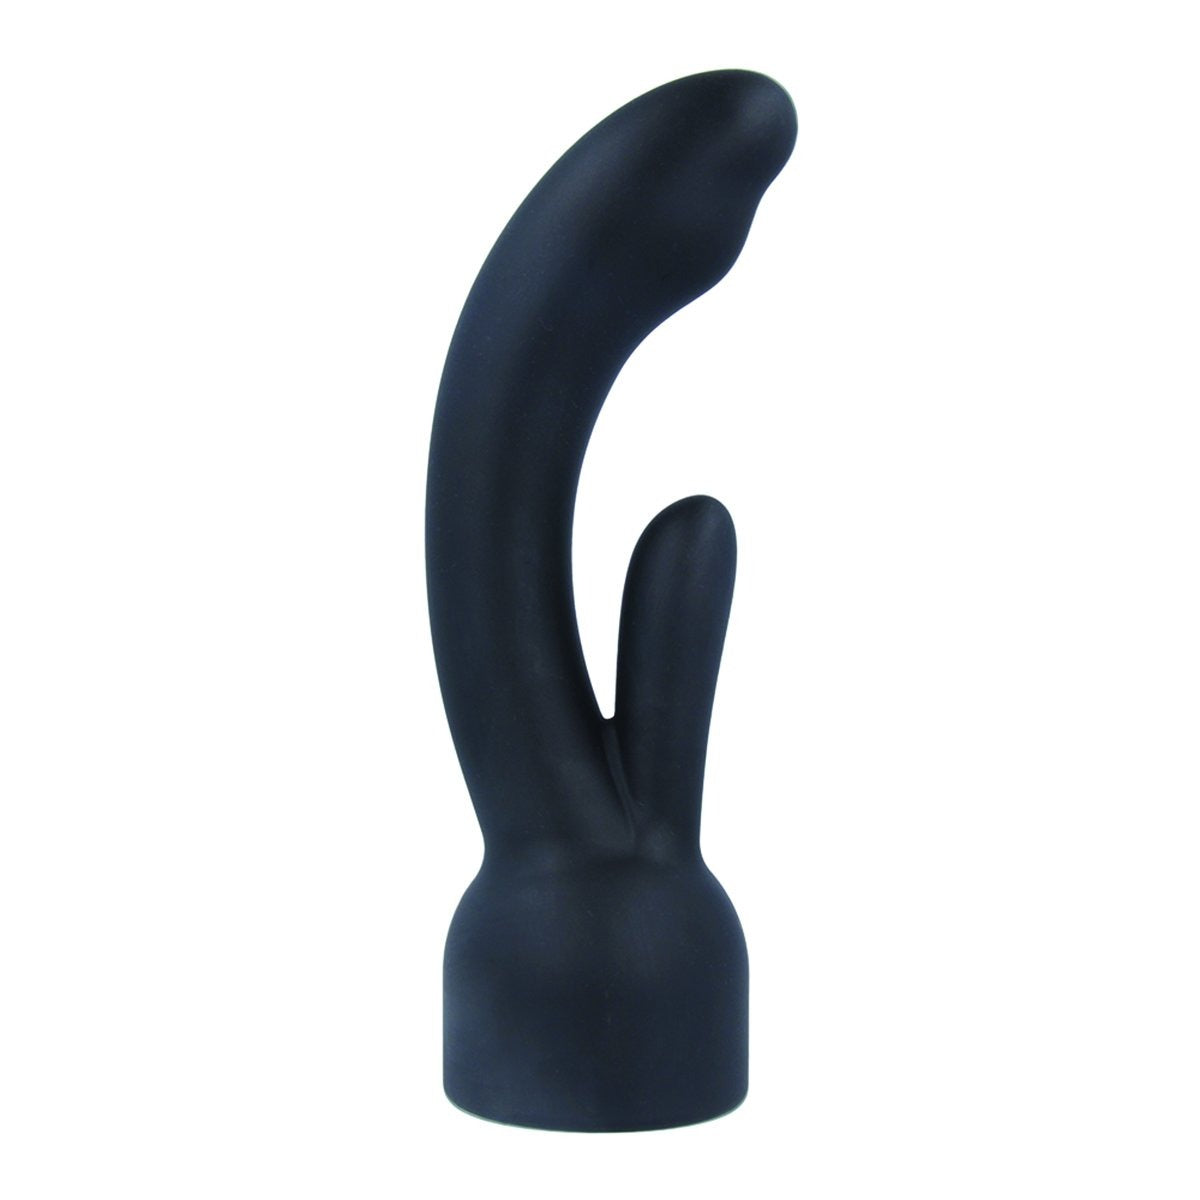 Doxy by Nexus G Spot Attachment - Buy At Luxury Toy X - Free 3-Day Shipping